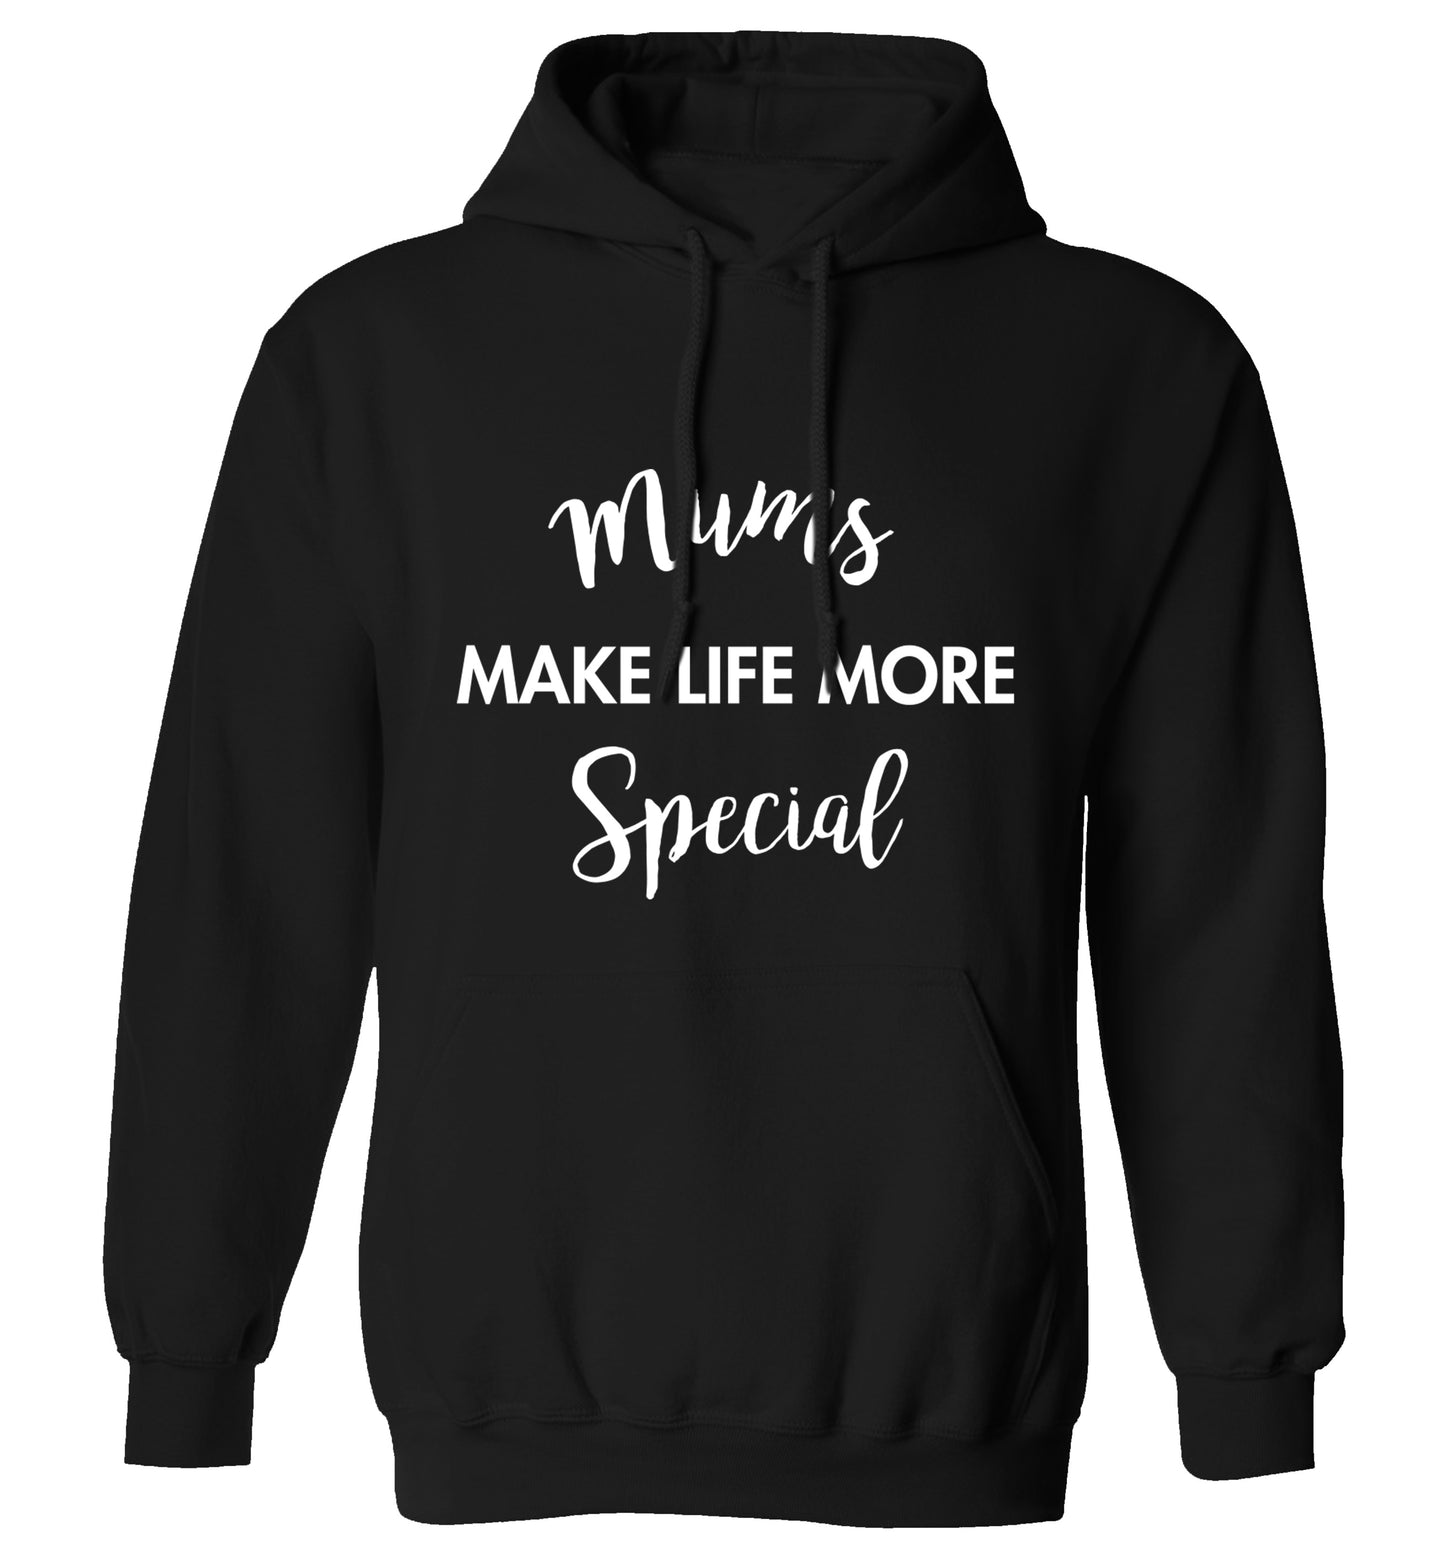 Mum's make life more special adults unisex black hoodie 2XL